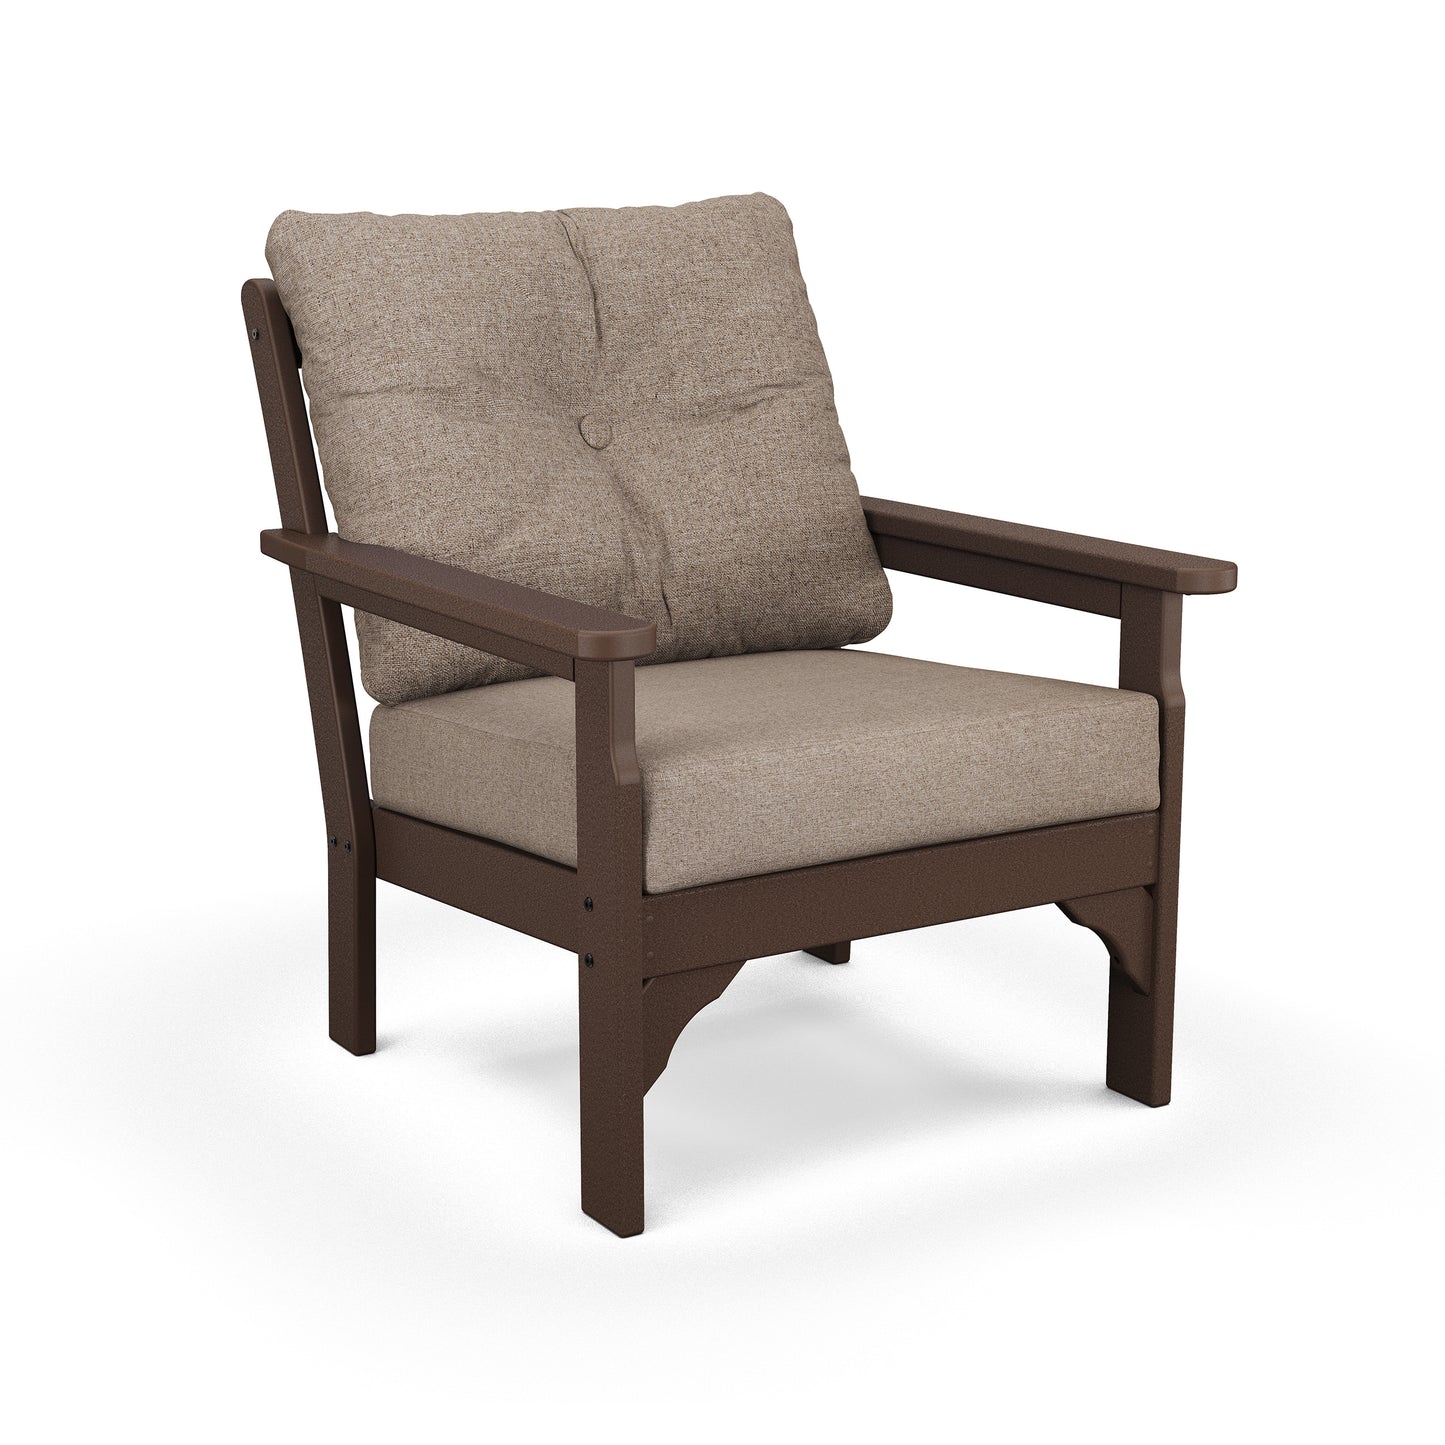 A modern POLYWOOD Vineyard Deep Seating Chair with a brown frame and beige all-weather fabric cushions, featuring a plush back cushion and a deep seating cushion, isolated on a white background.